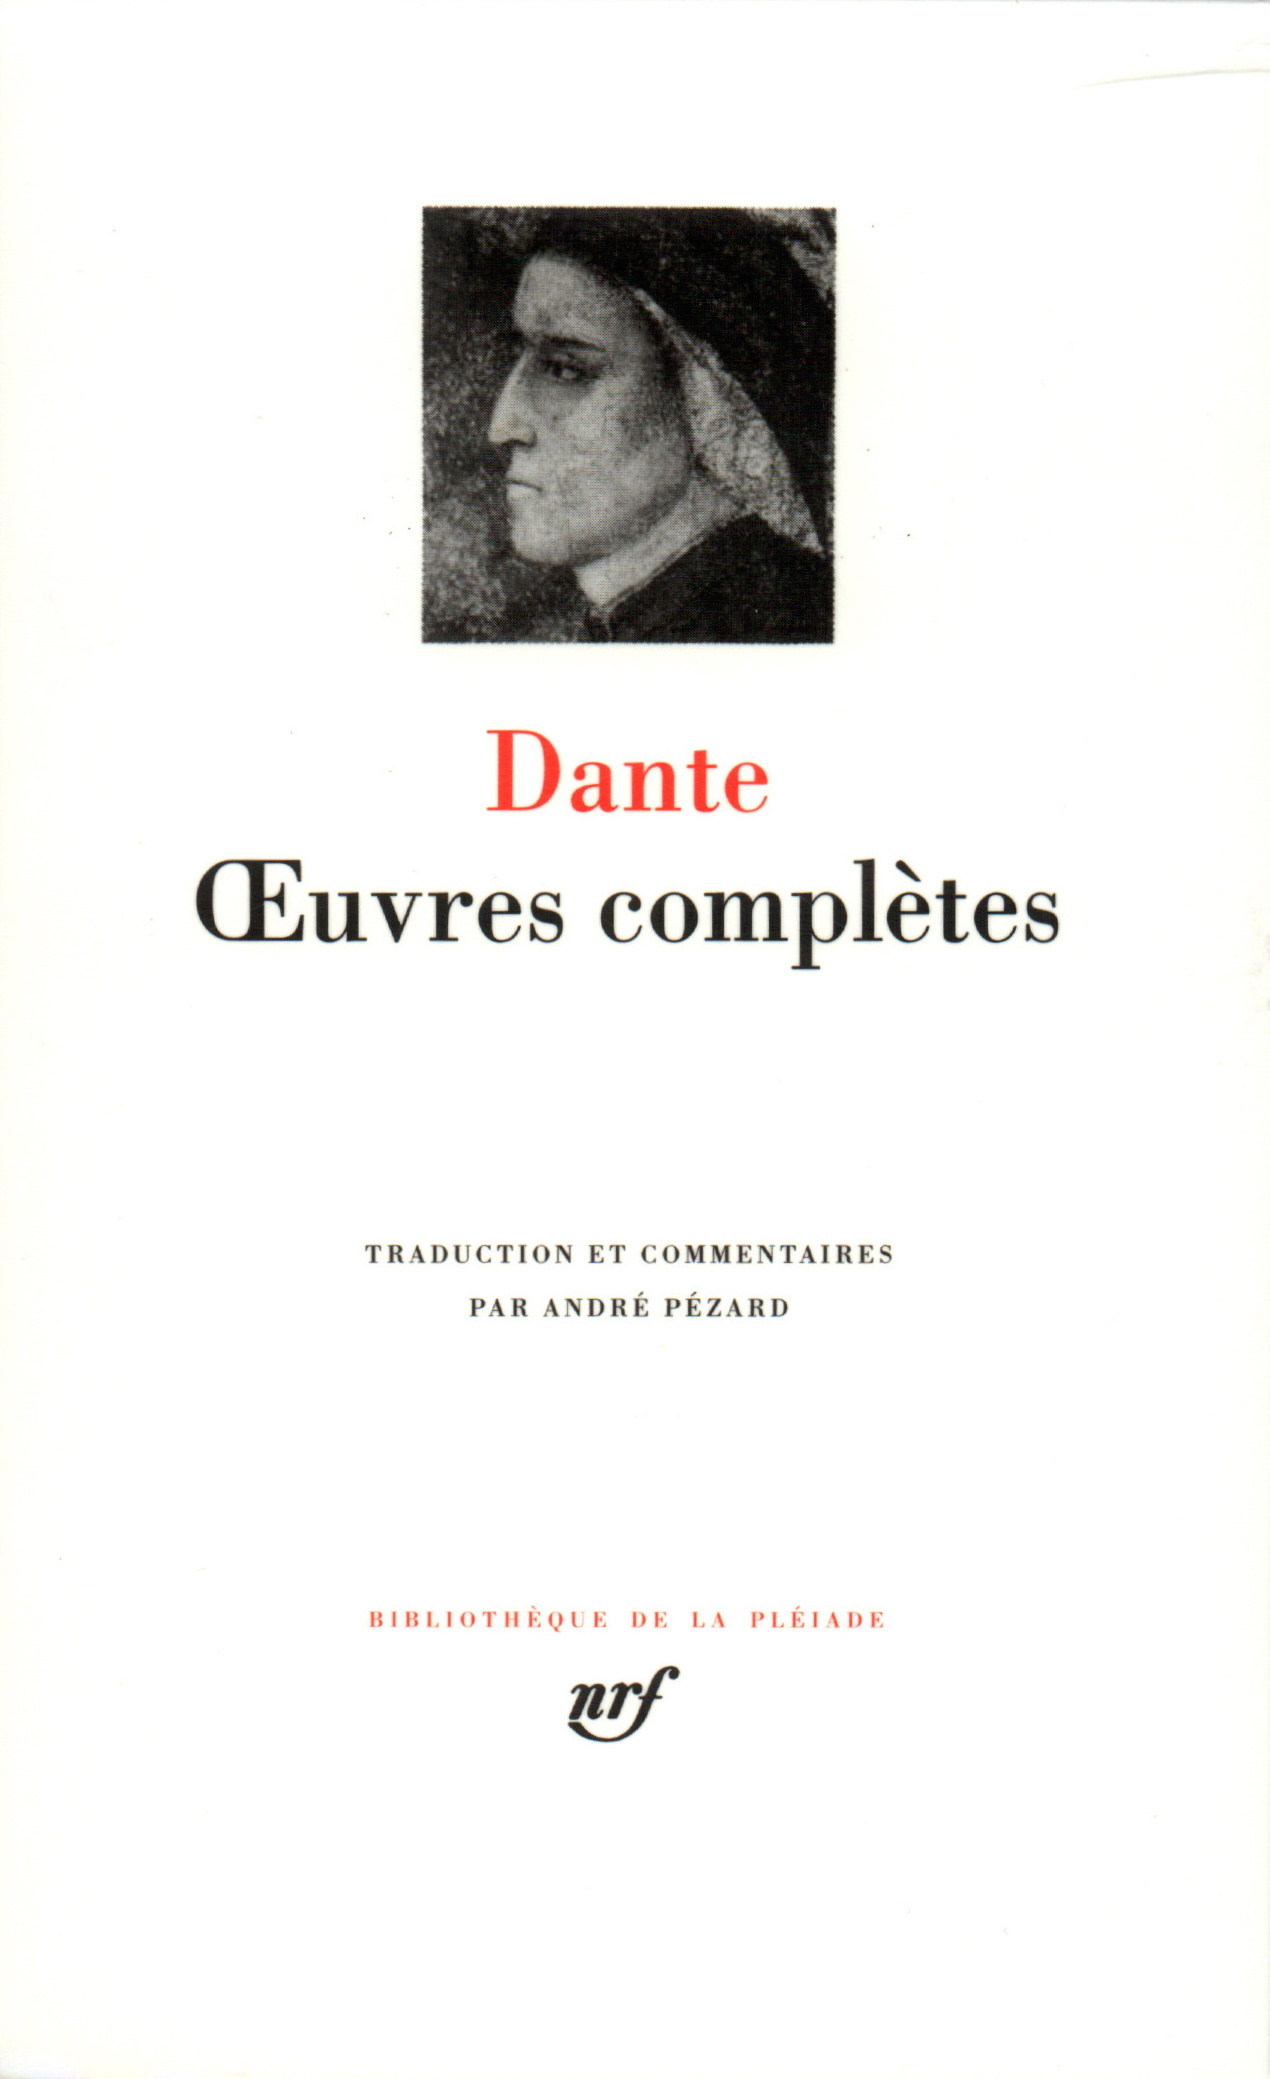 Œuvres complètes (9782070101566-front-cover)